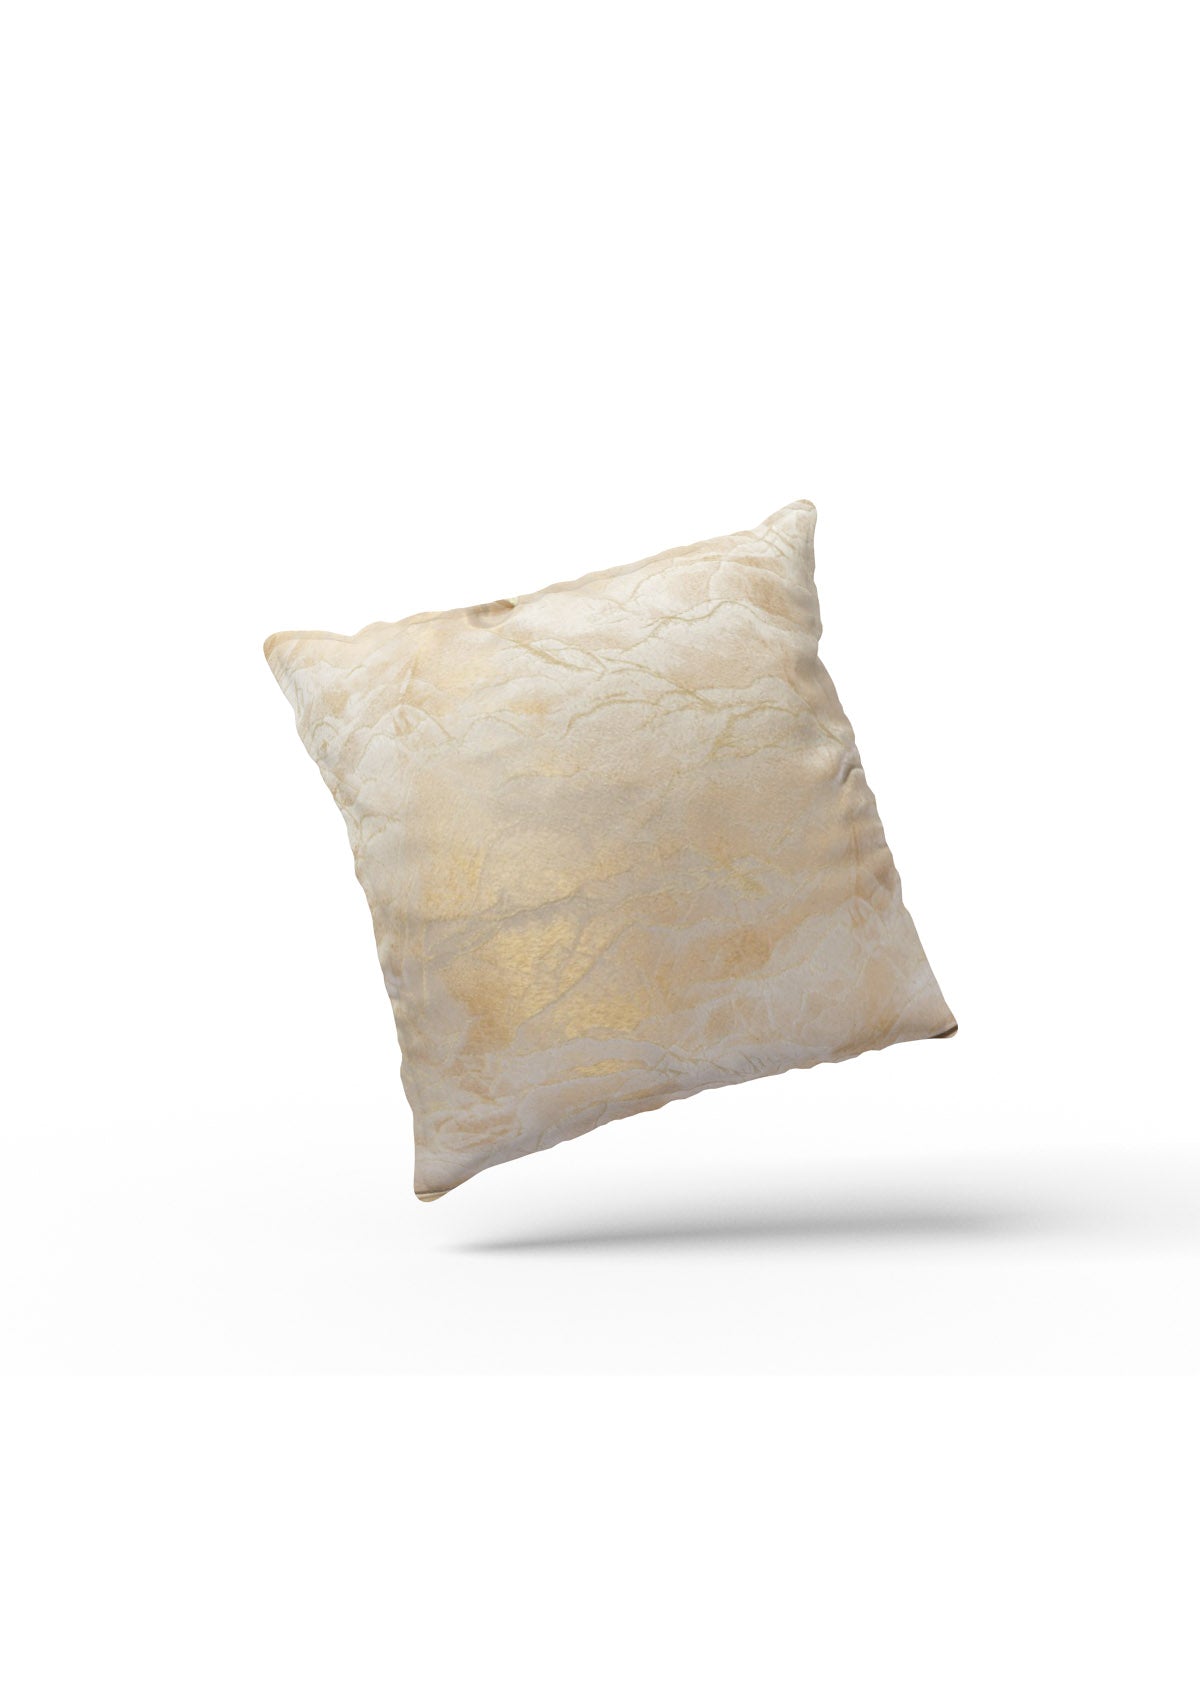 Cream and Gold Cushion Covers | CovermyCushion